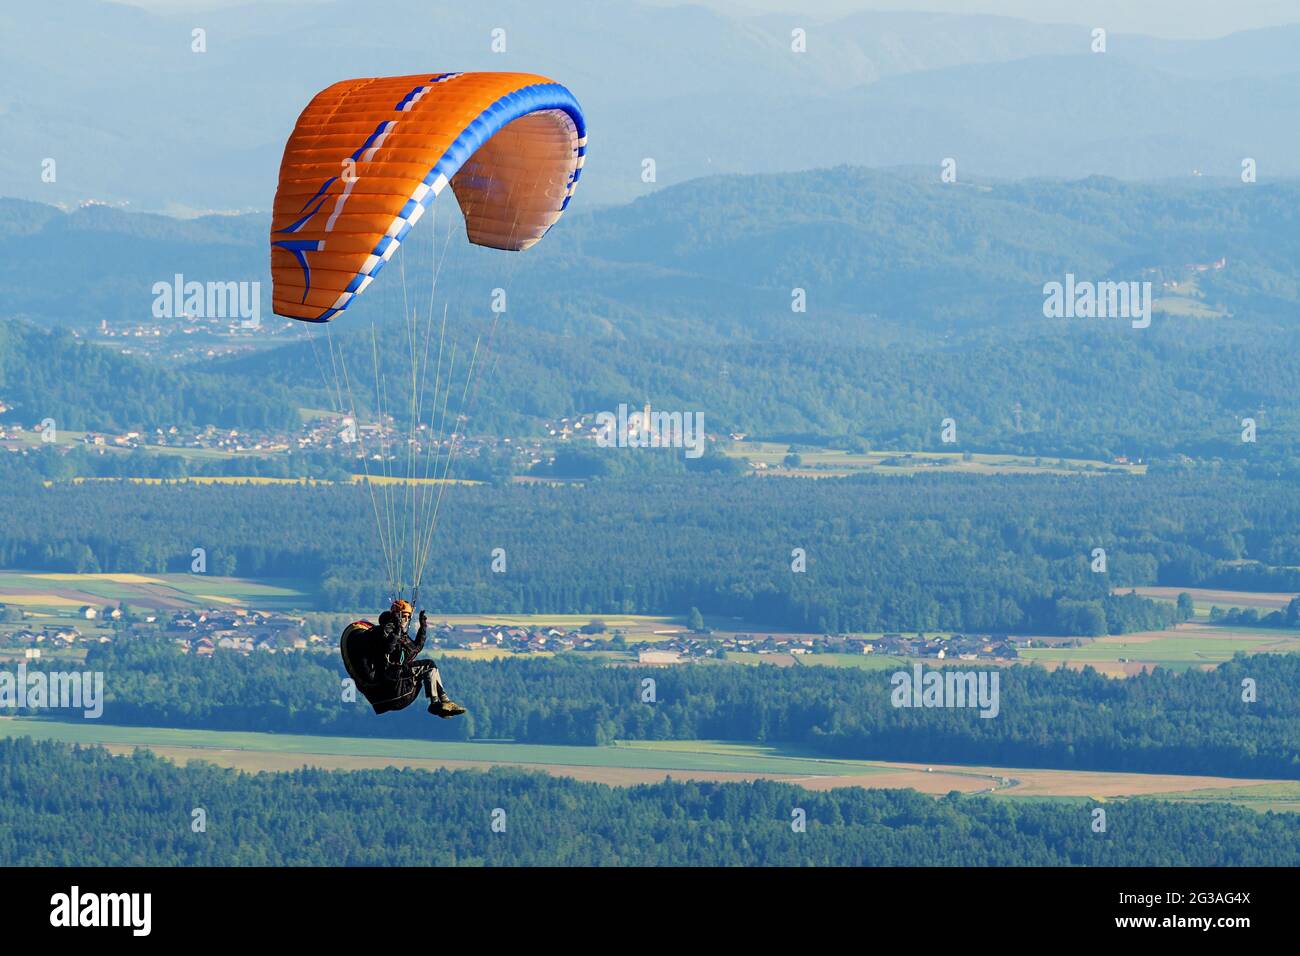 Paraglider with orange parachute flying over countryside before sunset. Adrenaline, extreme sports and relaxation concepts. Stock Photo